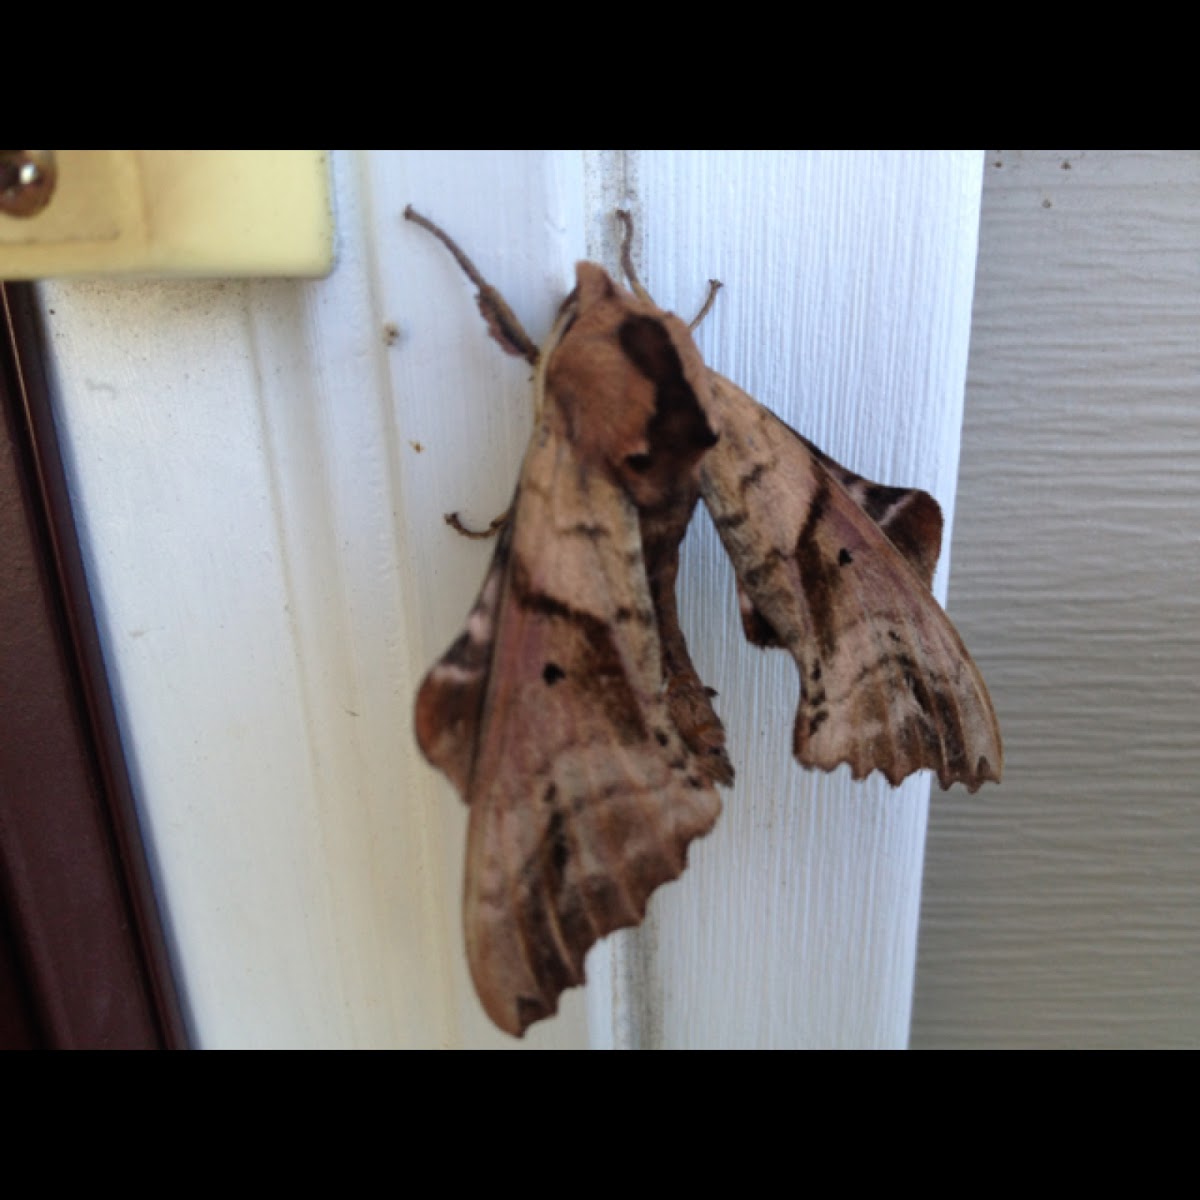 Blinded Sphinx Moth